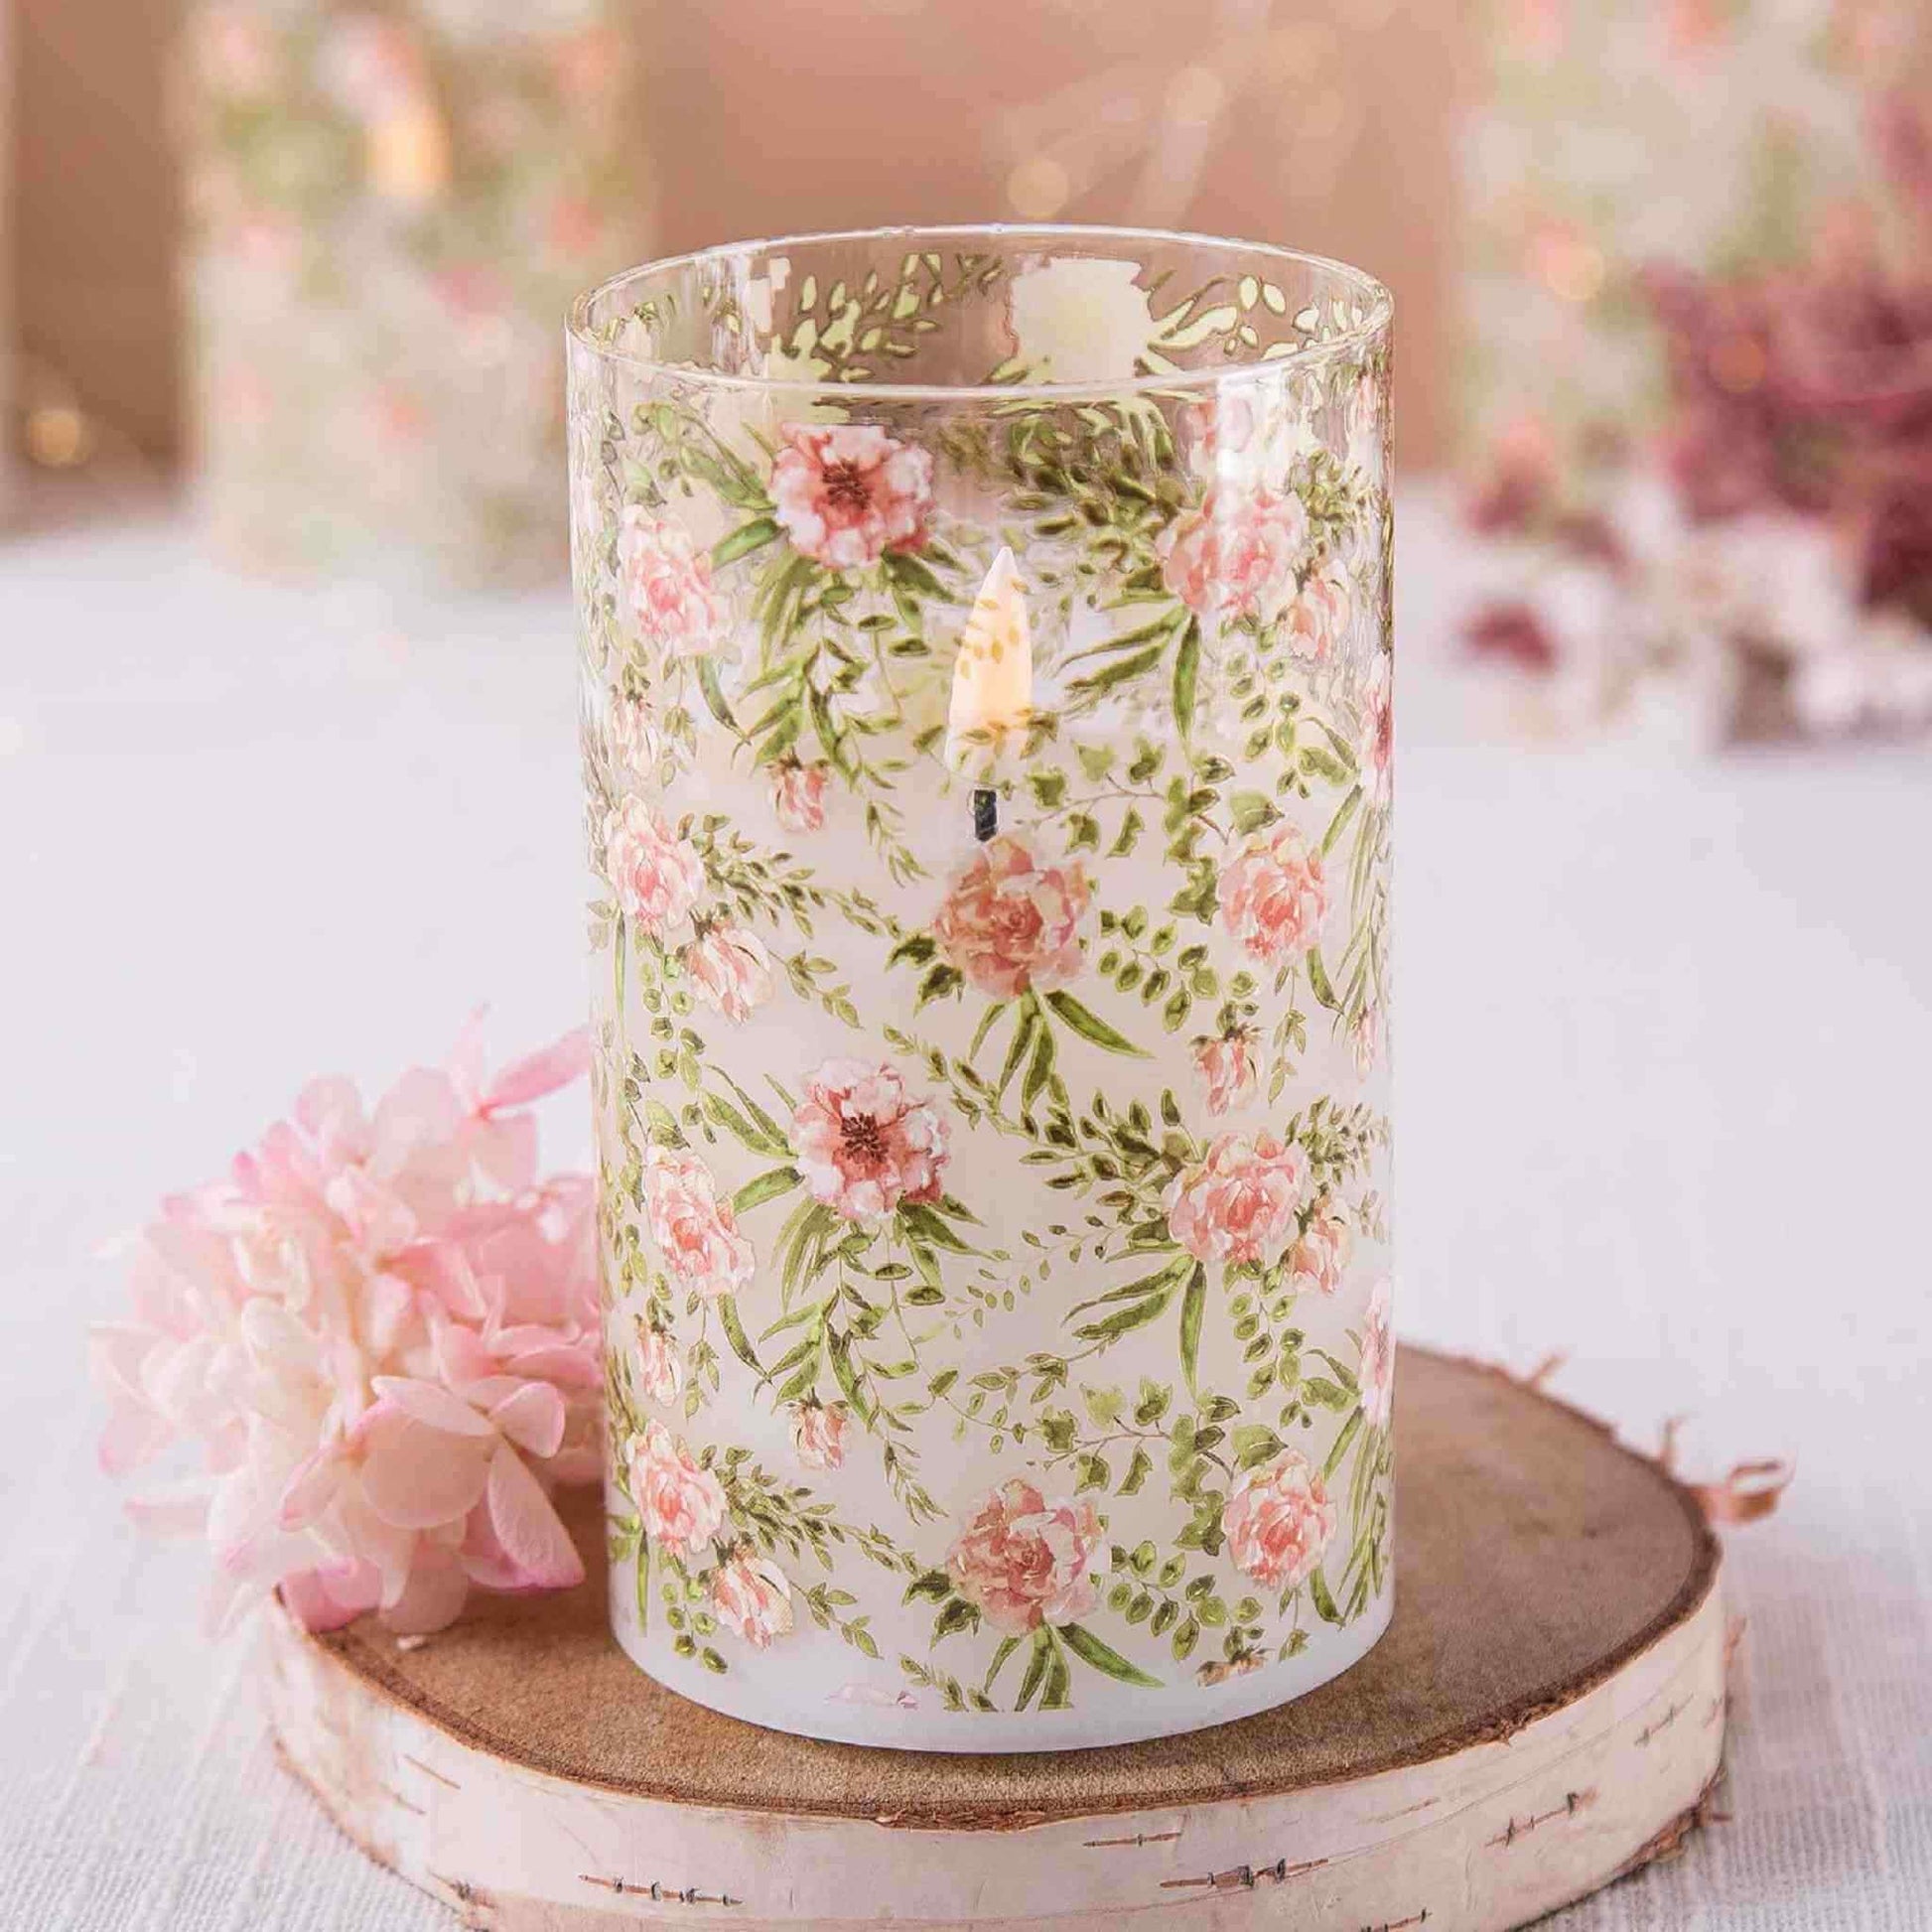 An eywamage floral glass flameless candle and a pink flower rest on a circular wooden board.